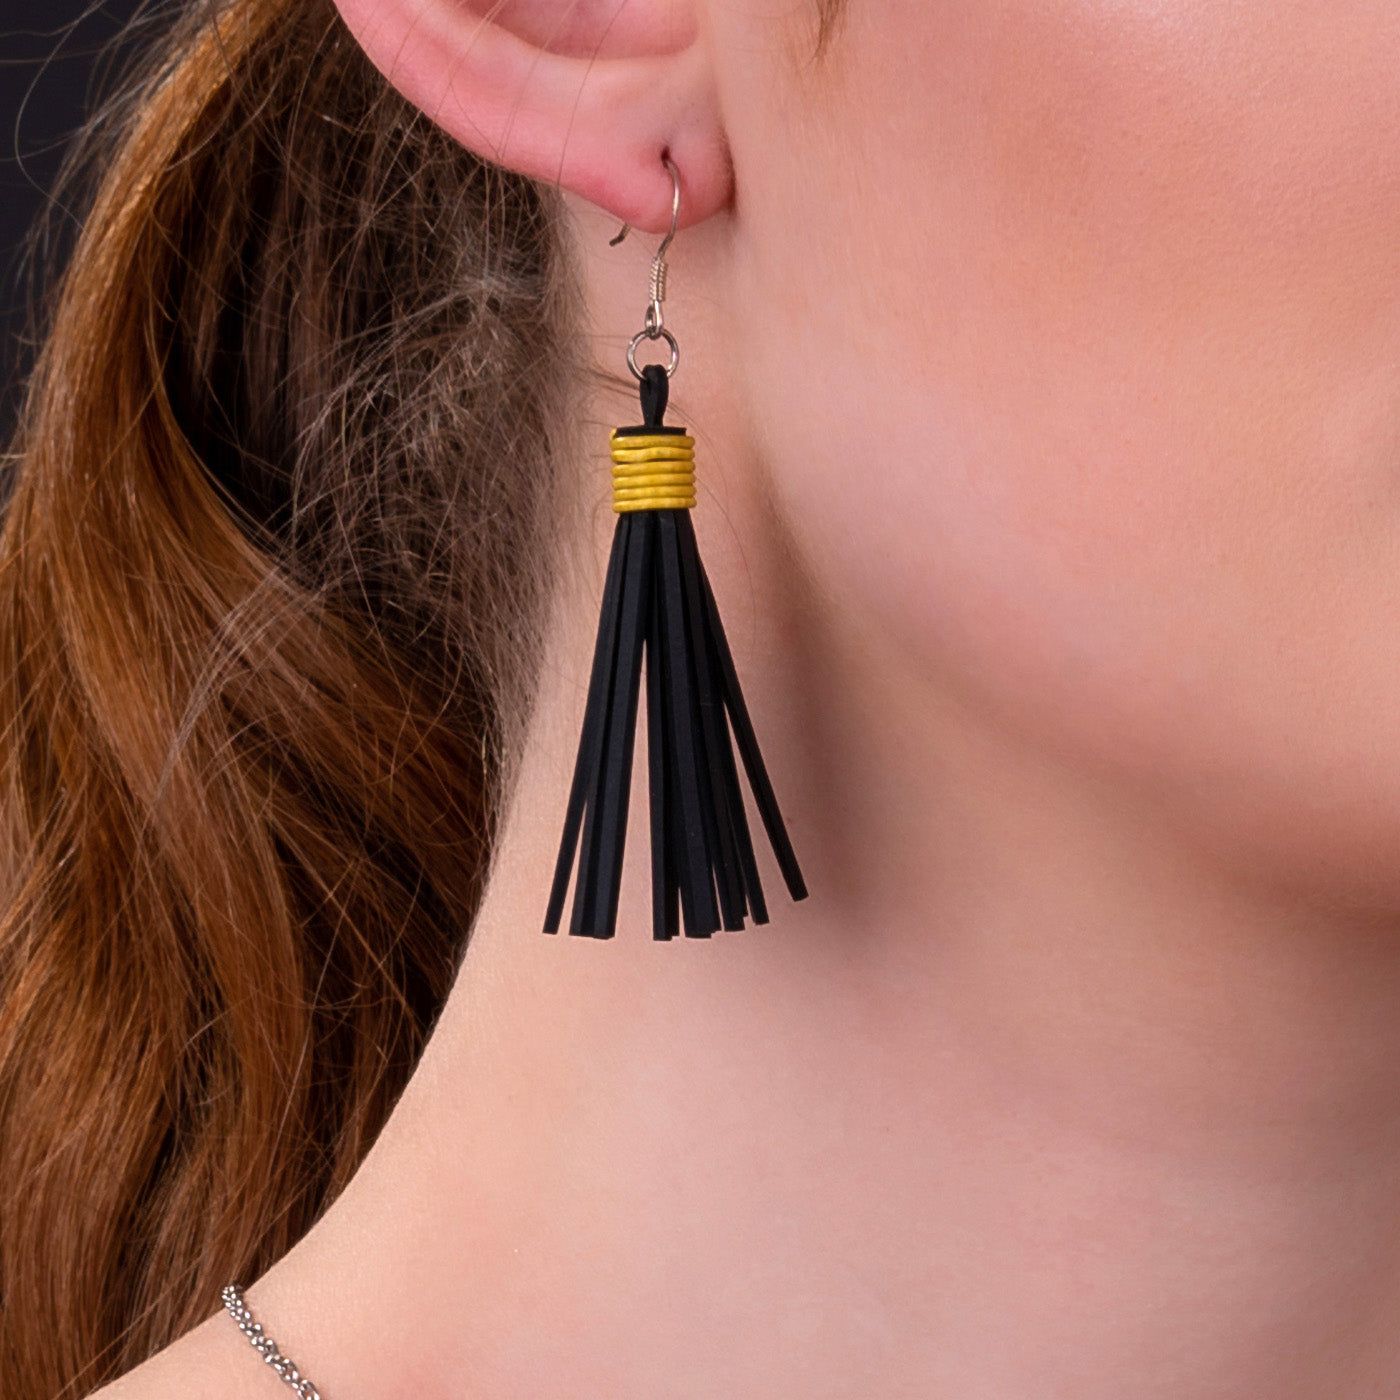 Asante Recycled Rubber Tassel Earrings by Paguro Upcycle